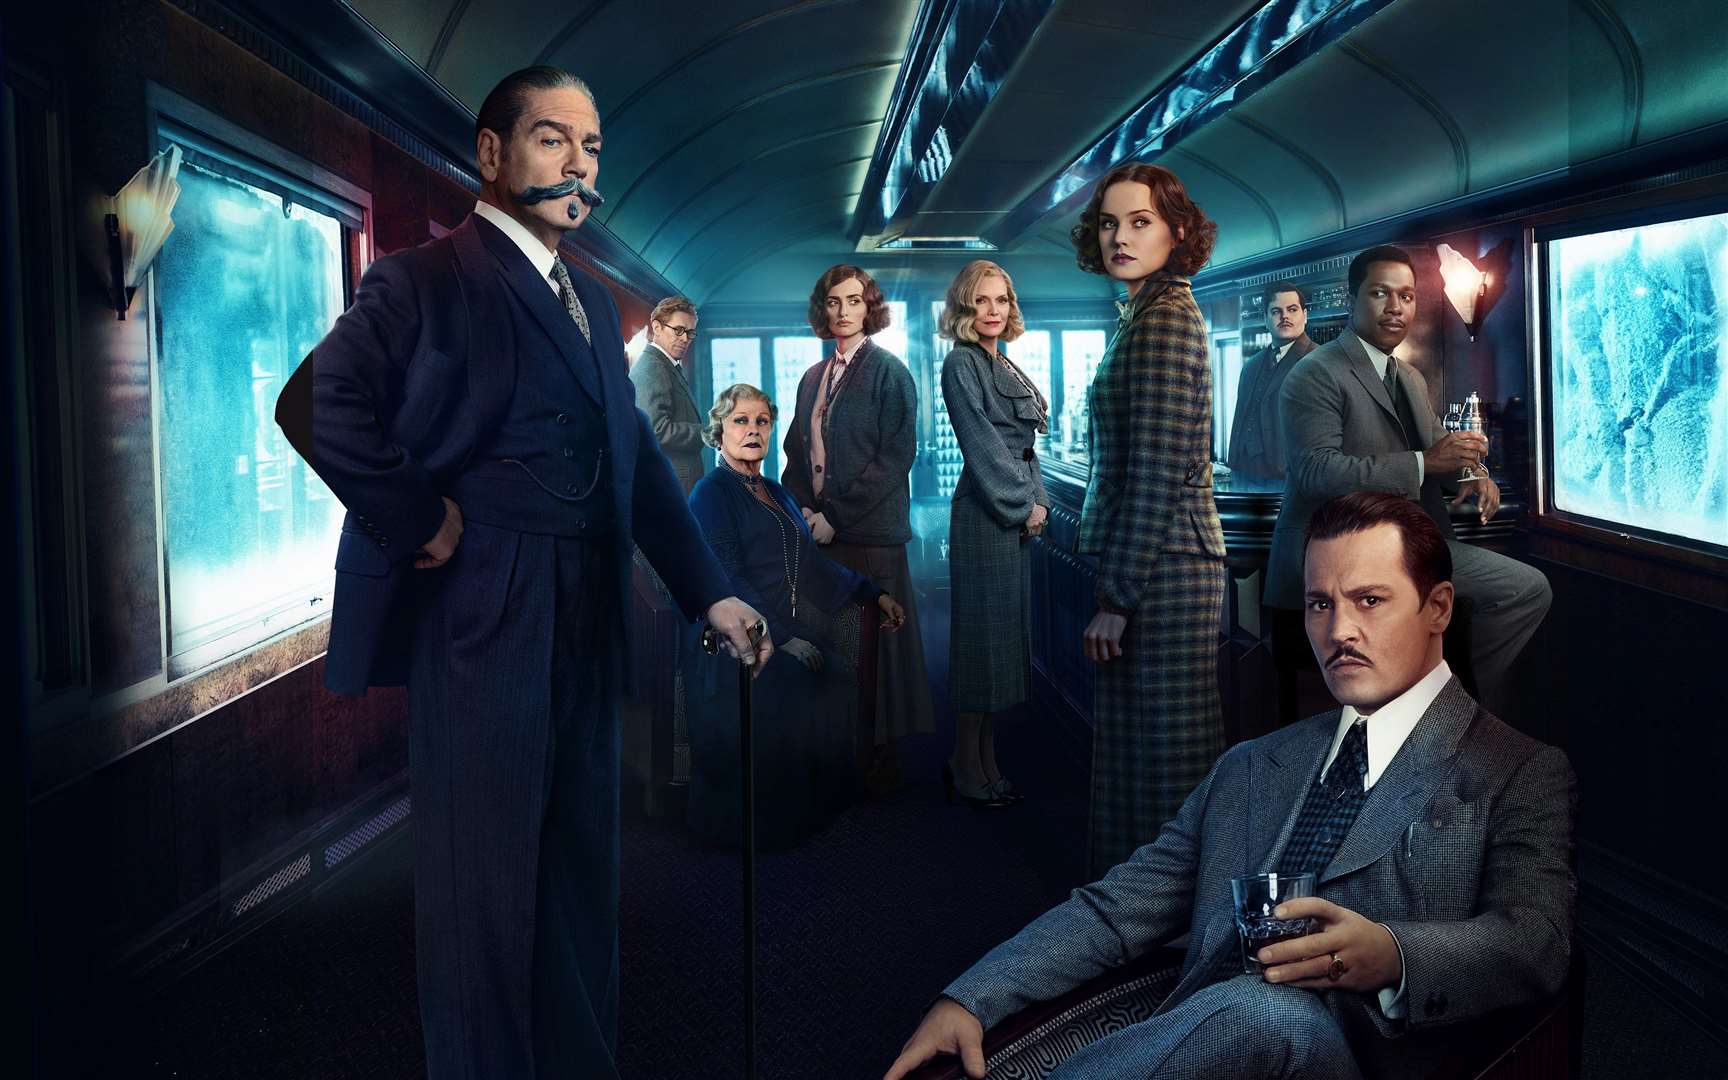 The cast of the 2017 adaptation of Murder on the Orient Express